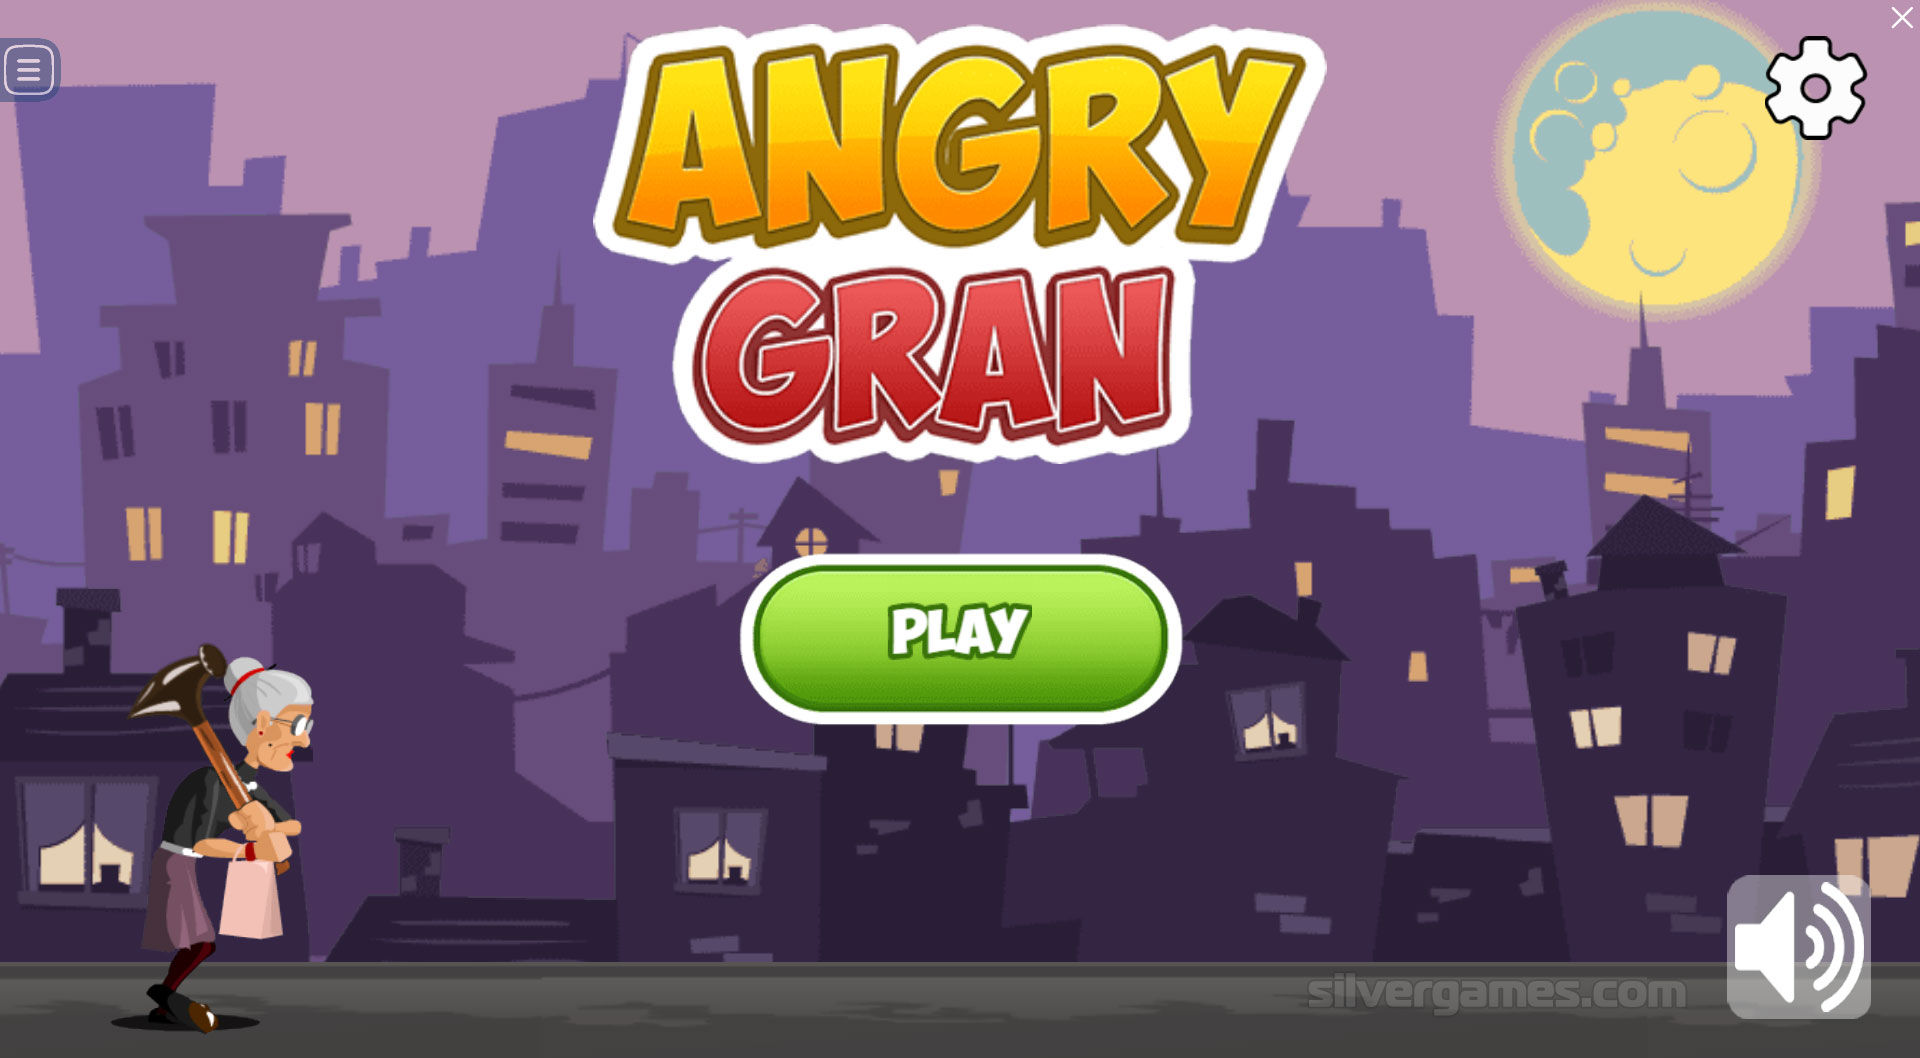 Granny Games: Play Granny Games on LittleGames for free